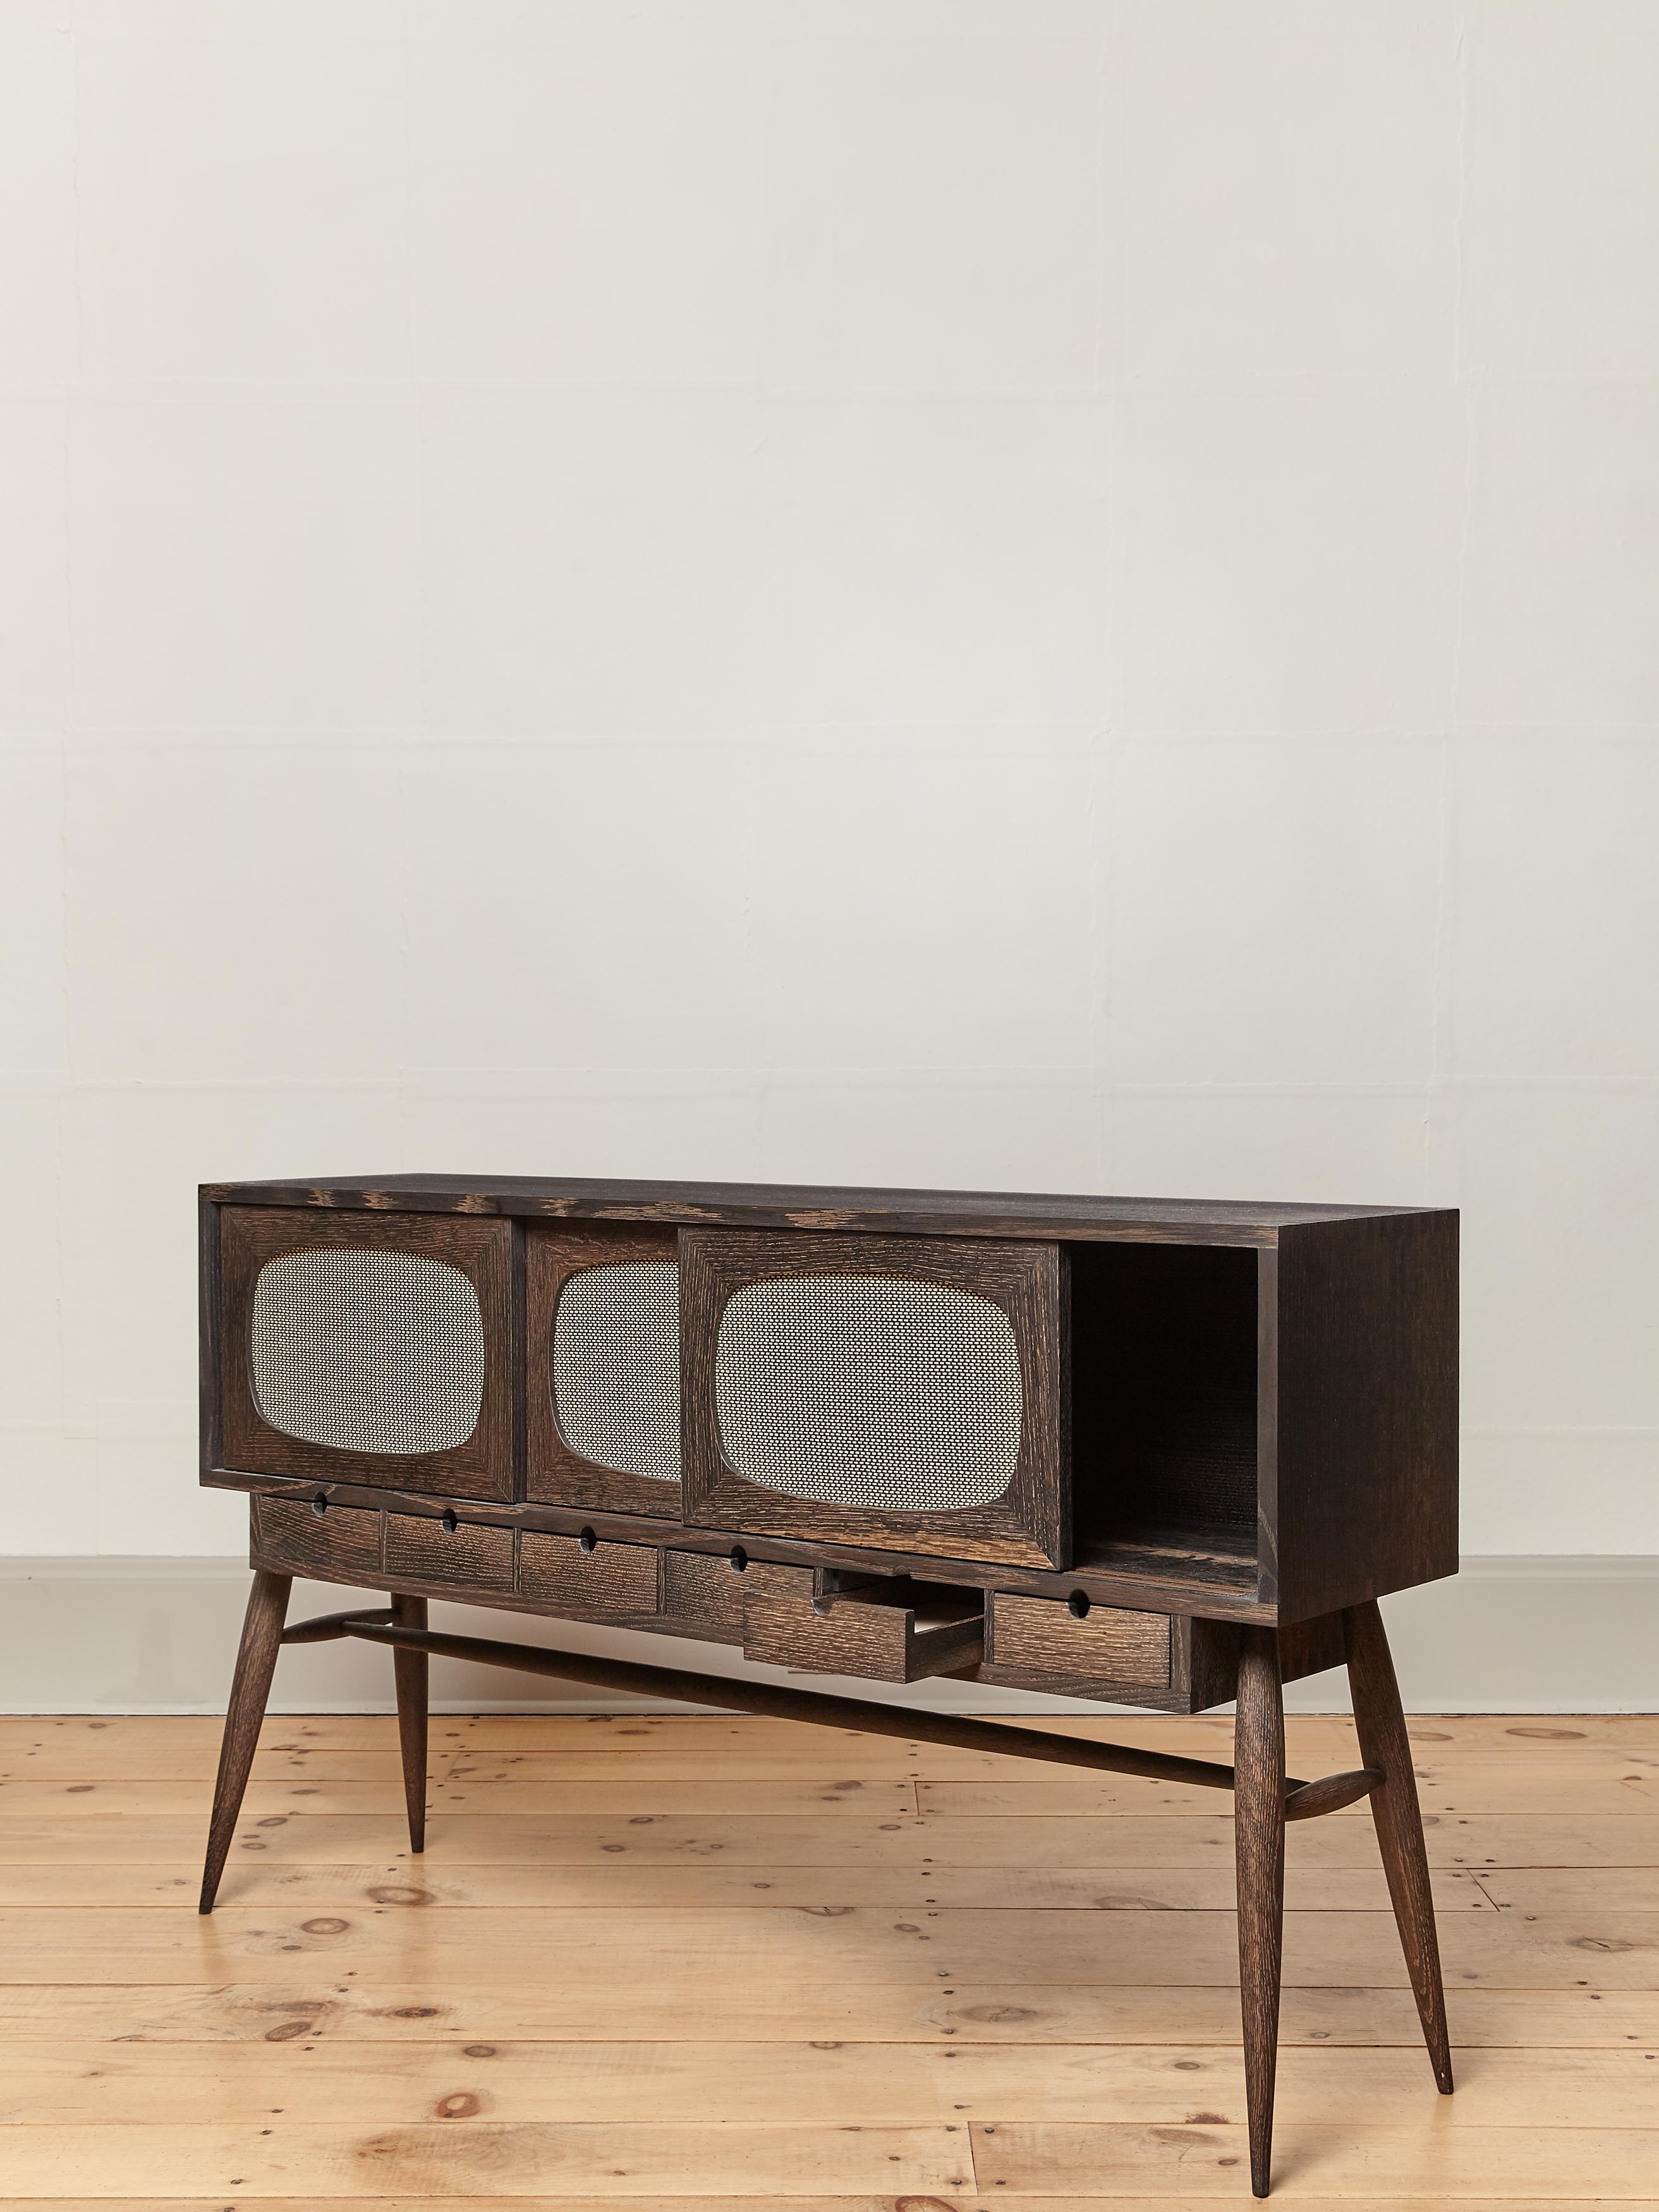 The Devon TV console is a modern take on mid-century storage. The naturally oxidized (blackened) oak console features slender turned legs and rails; genuine Marshall speaker grill cloth in its three sliding doors and 6 natural leather lined drawers.